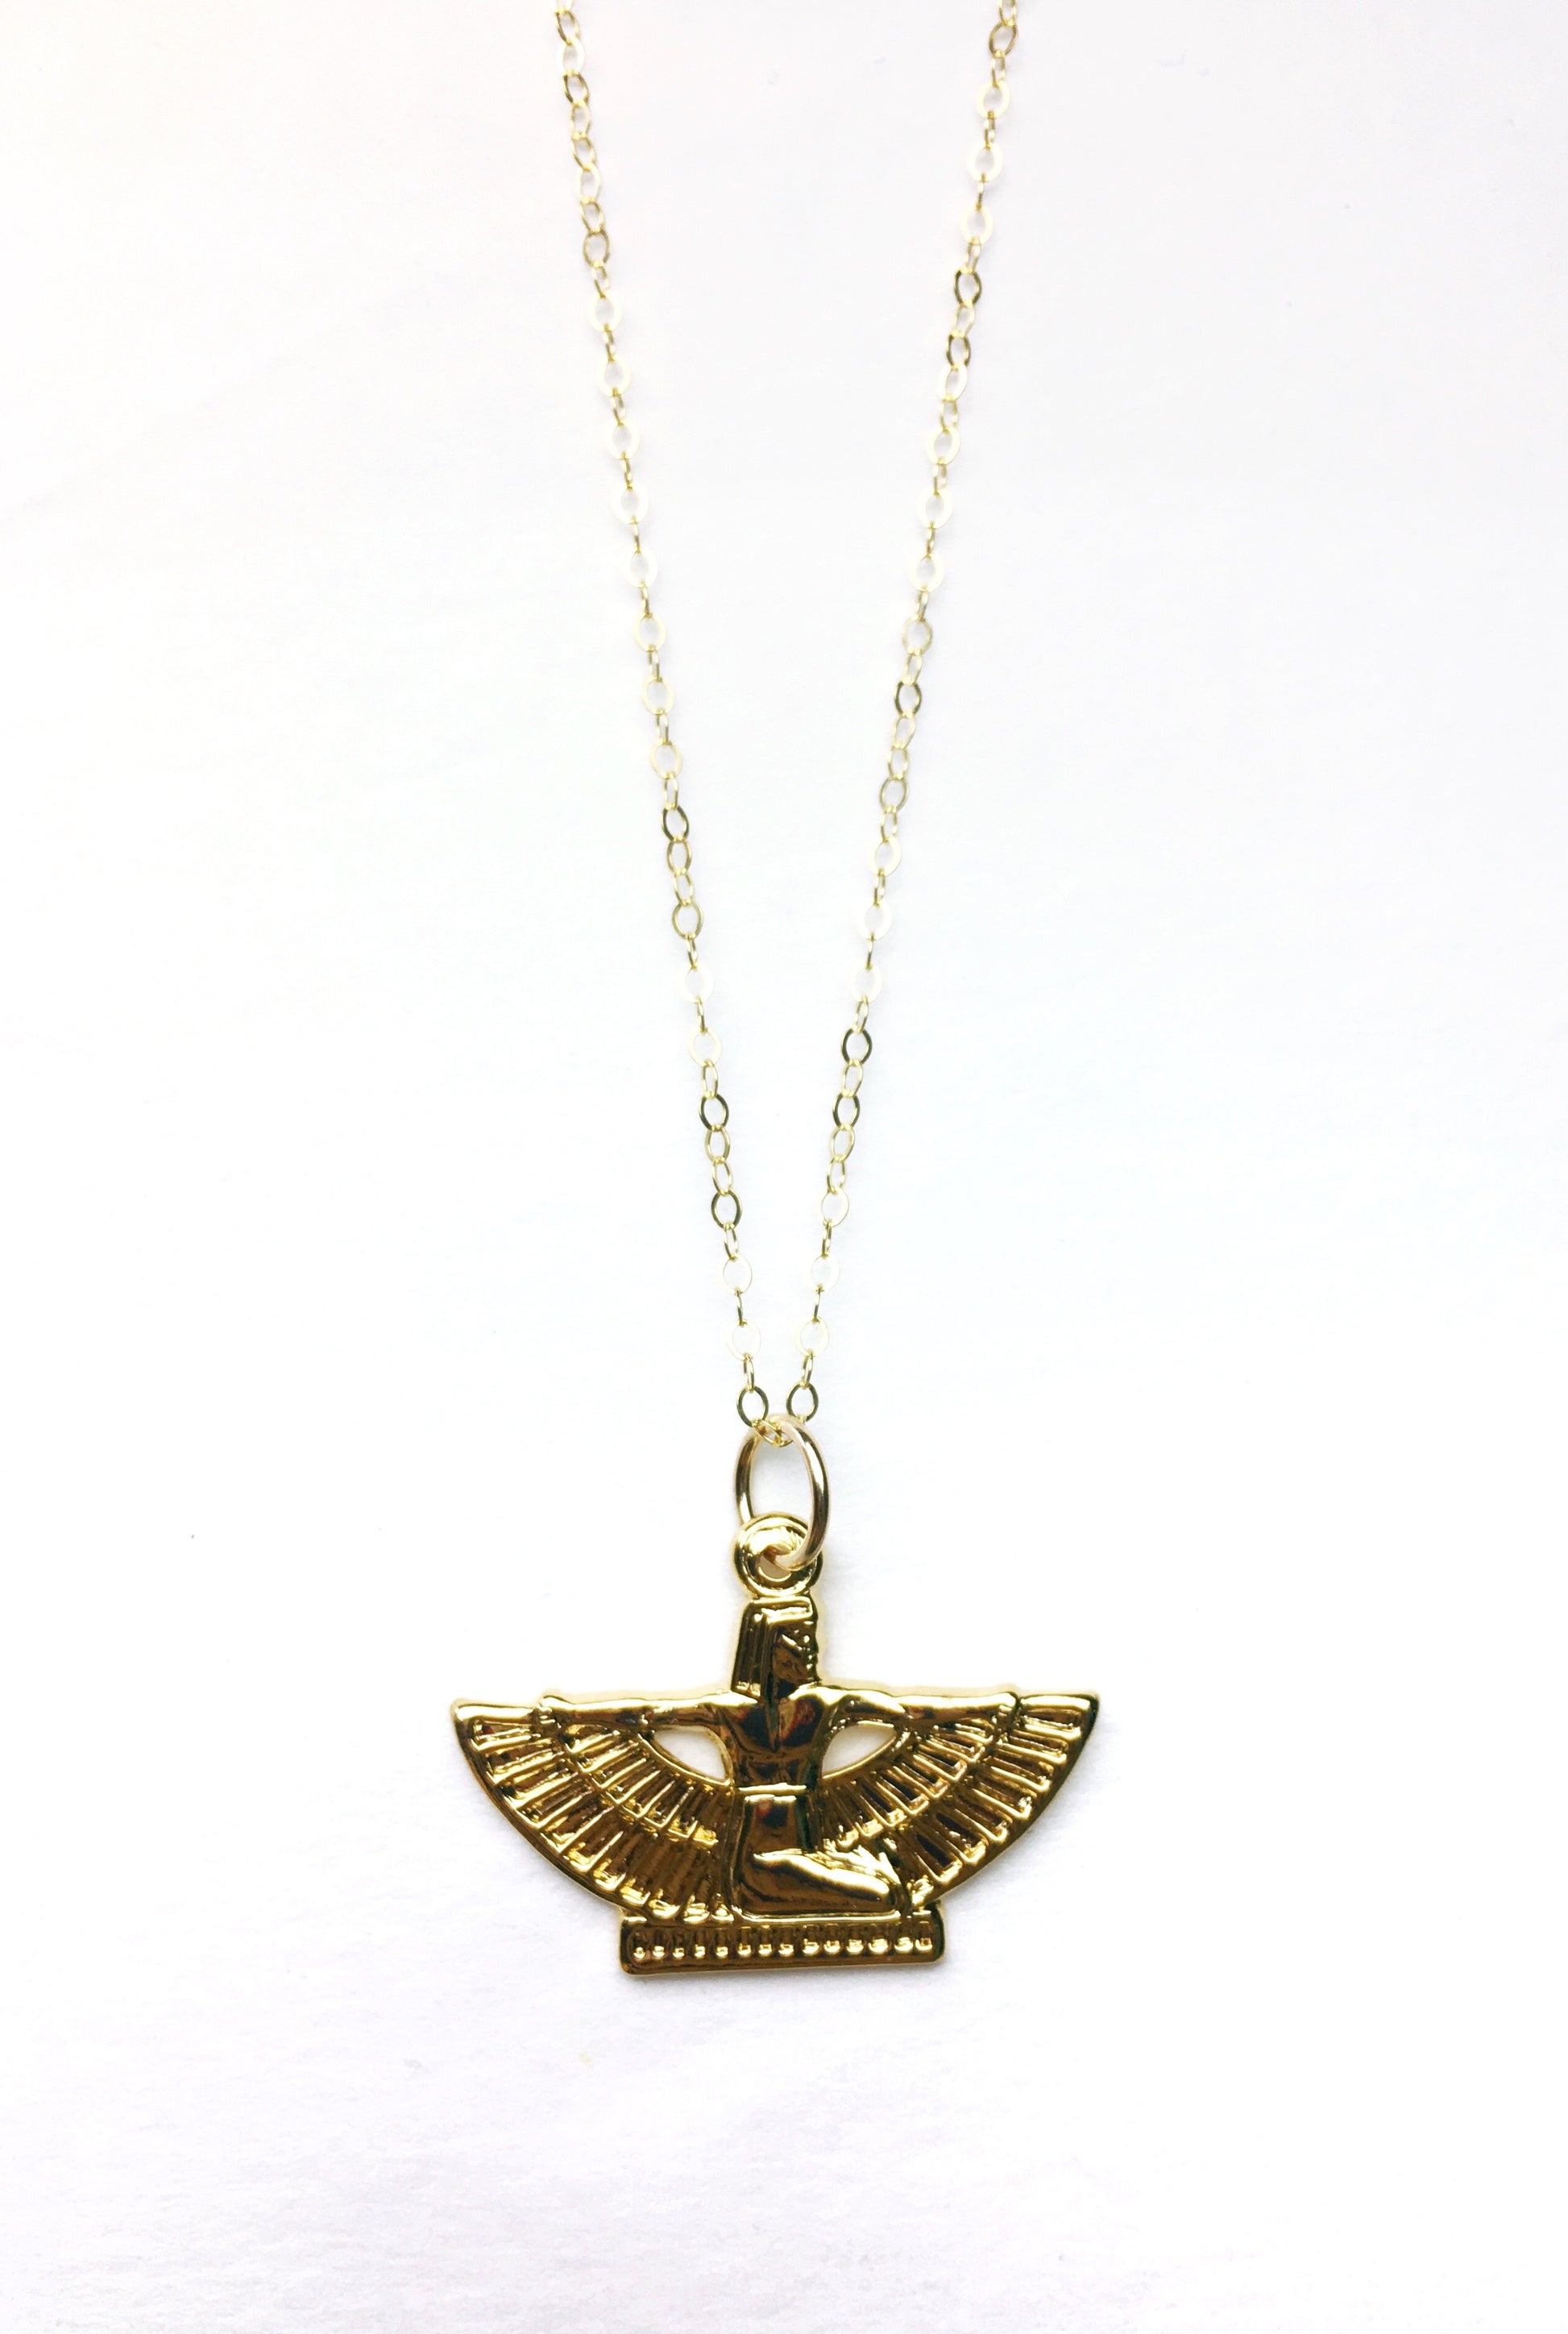 Diosa Isis Necklace - Luni